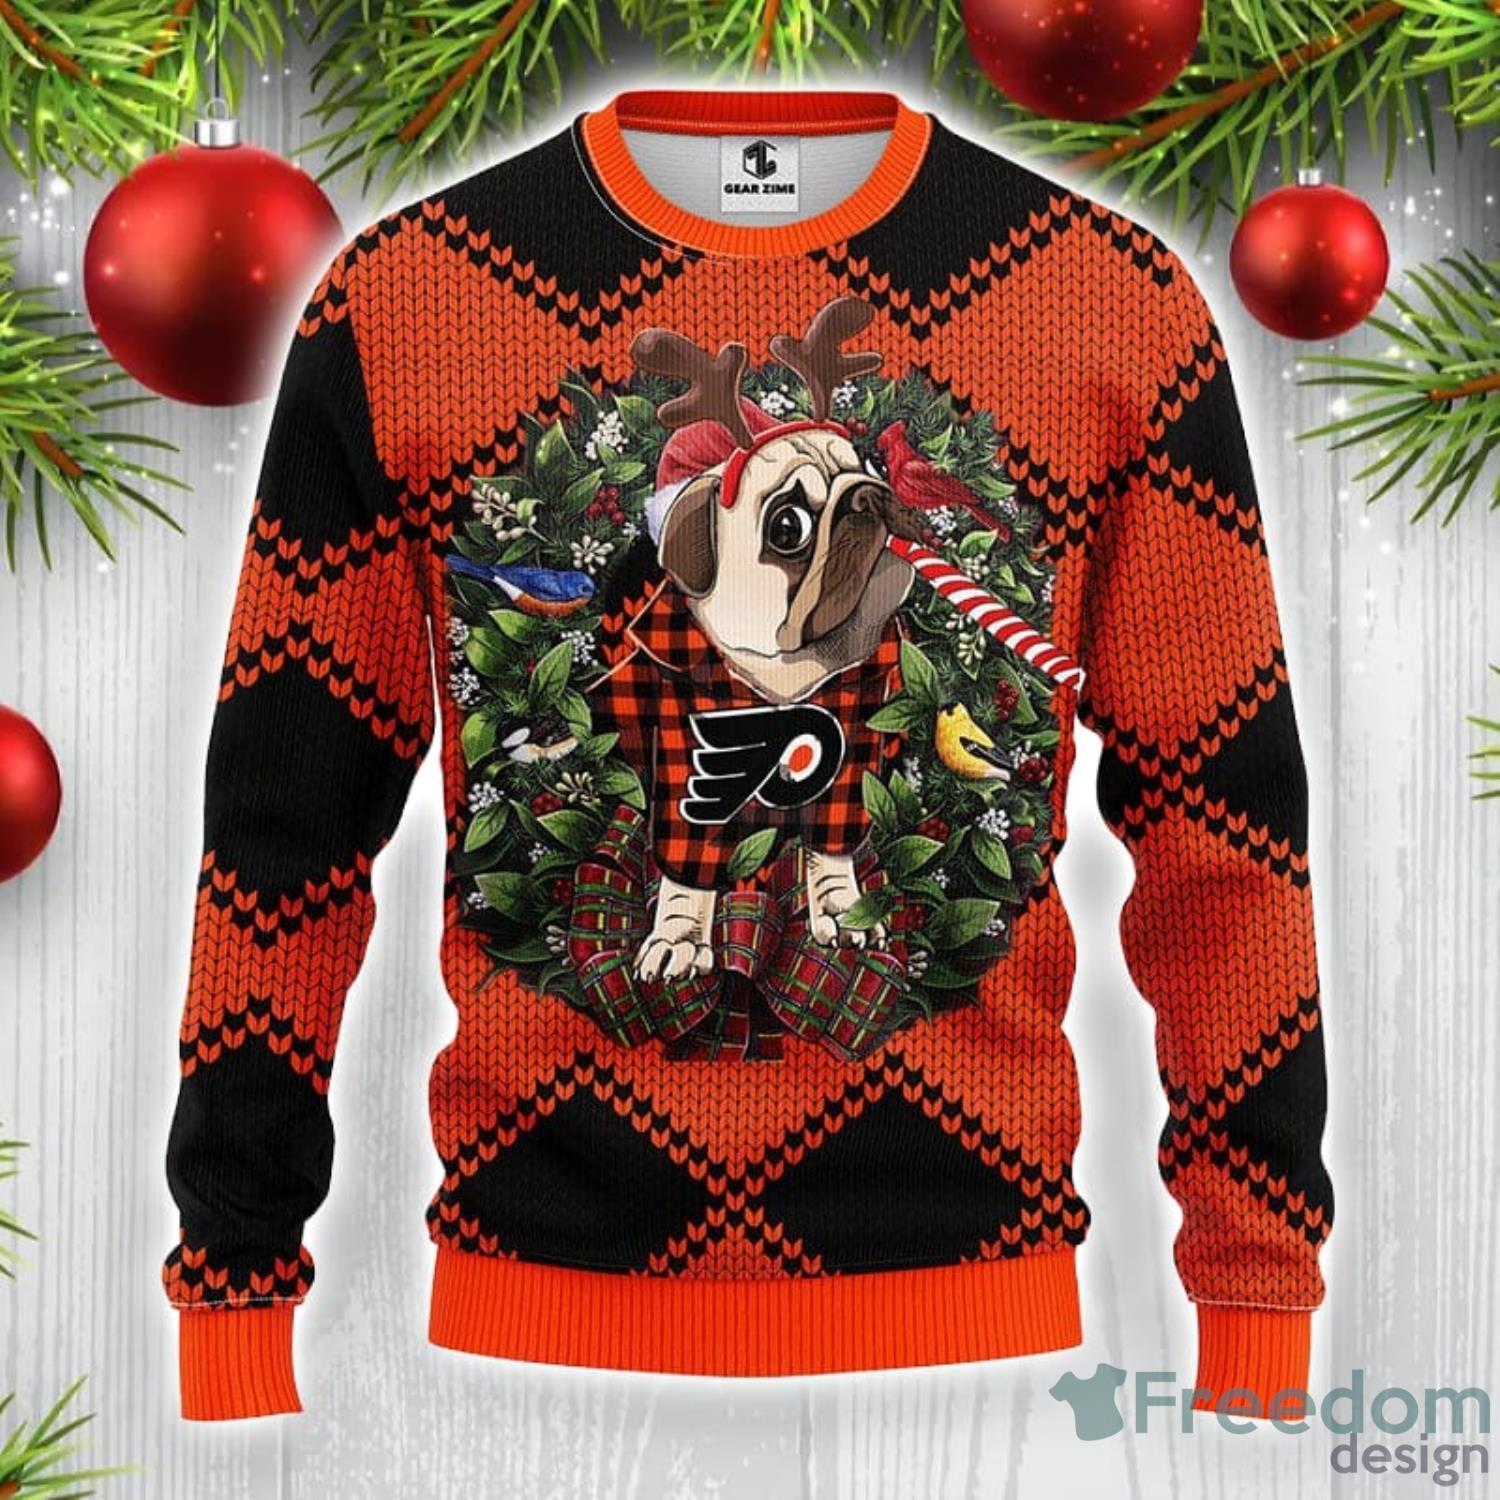 Detroit Red Wings Pub Dog Christmas Ugly Sweater - Freedomdesign